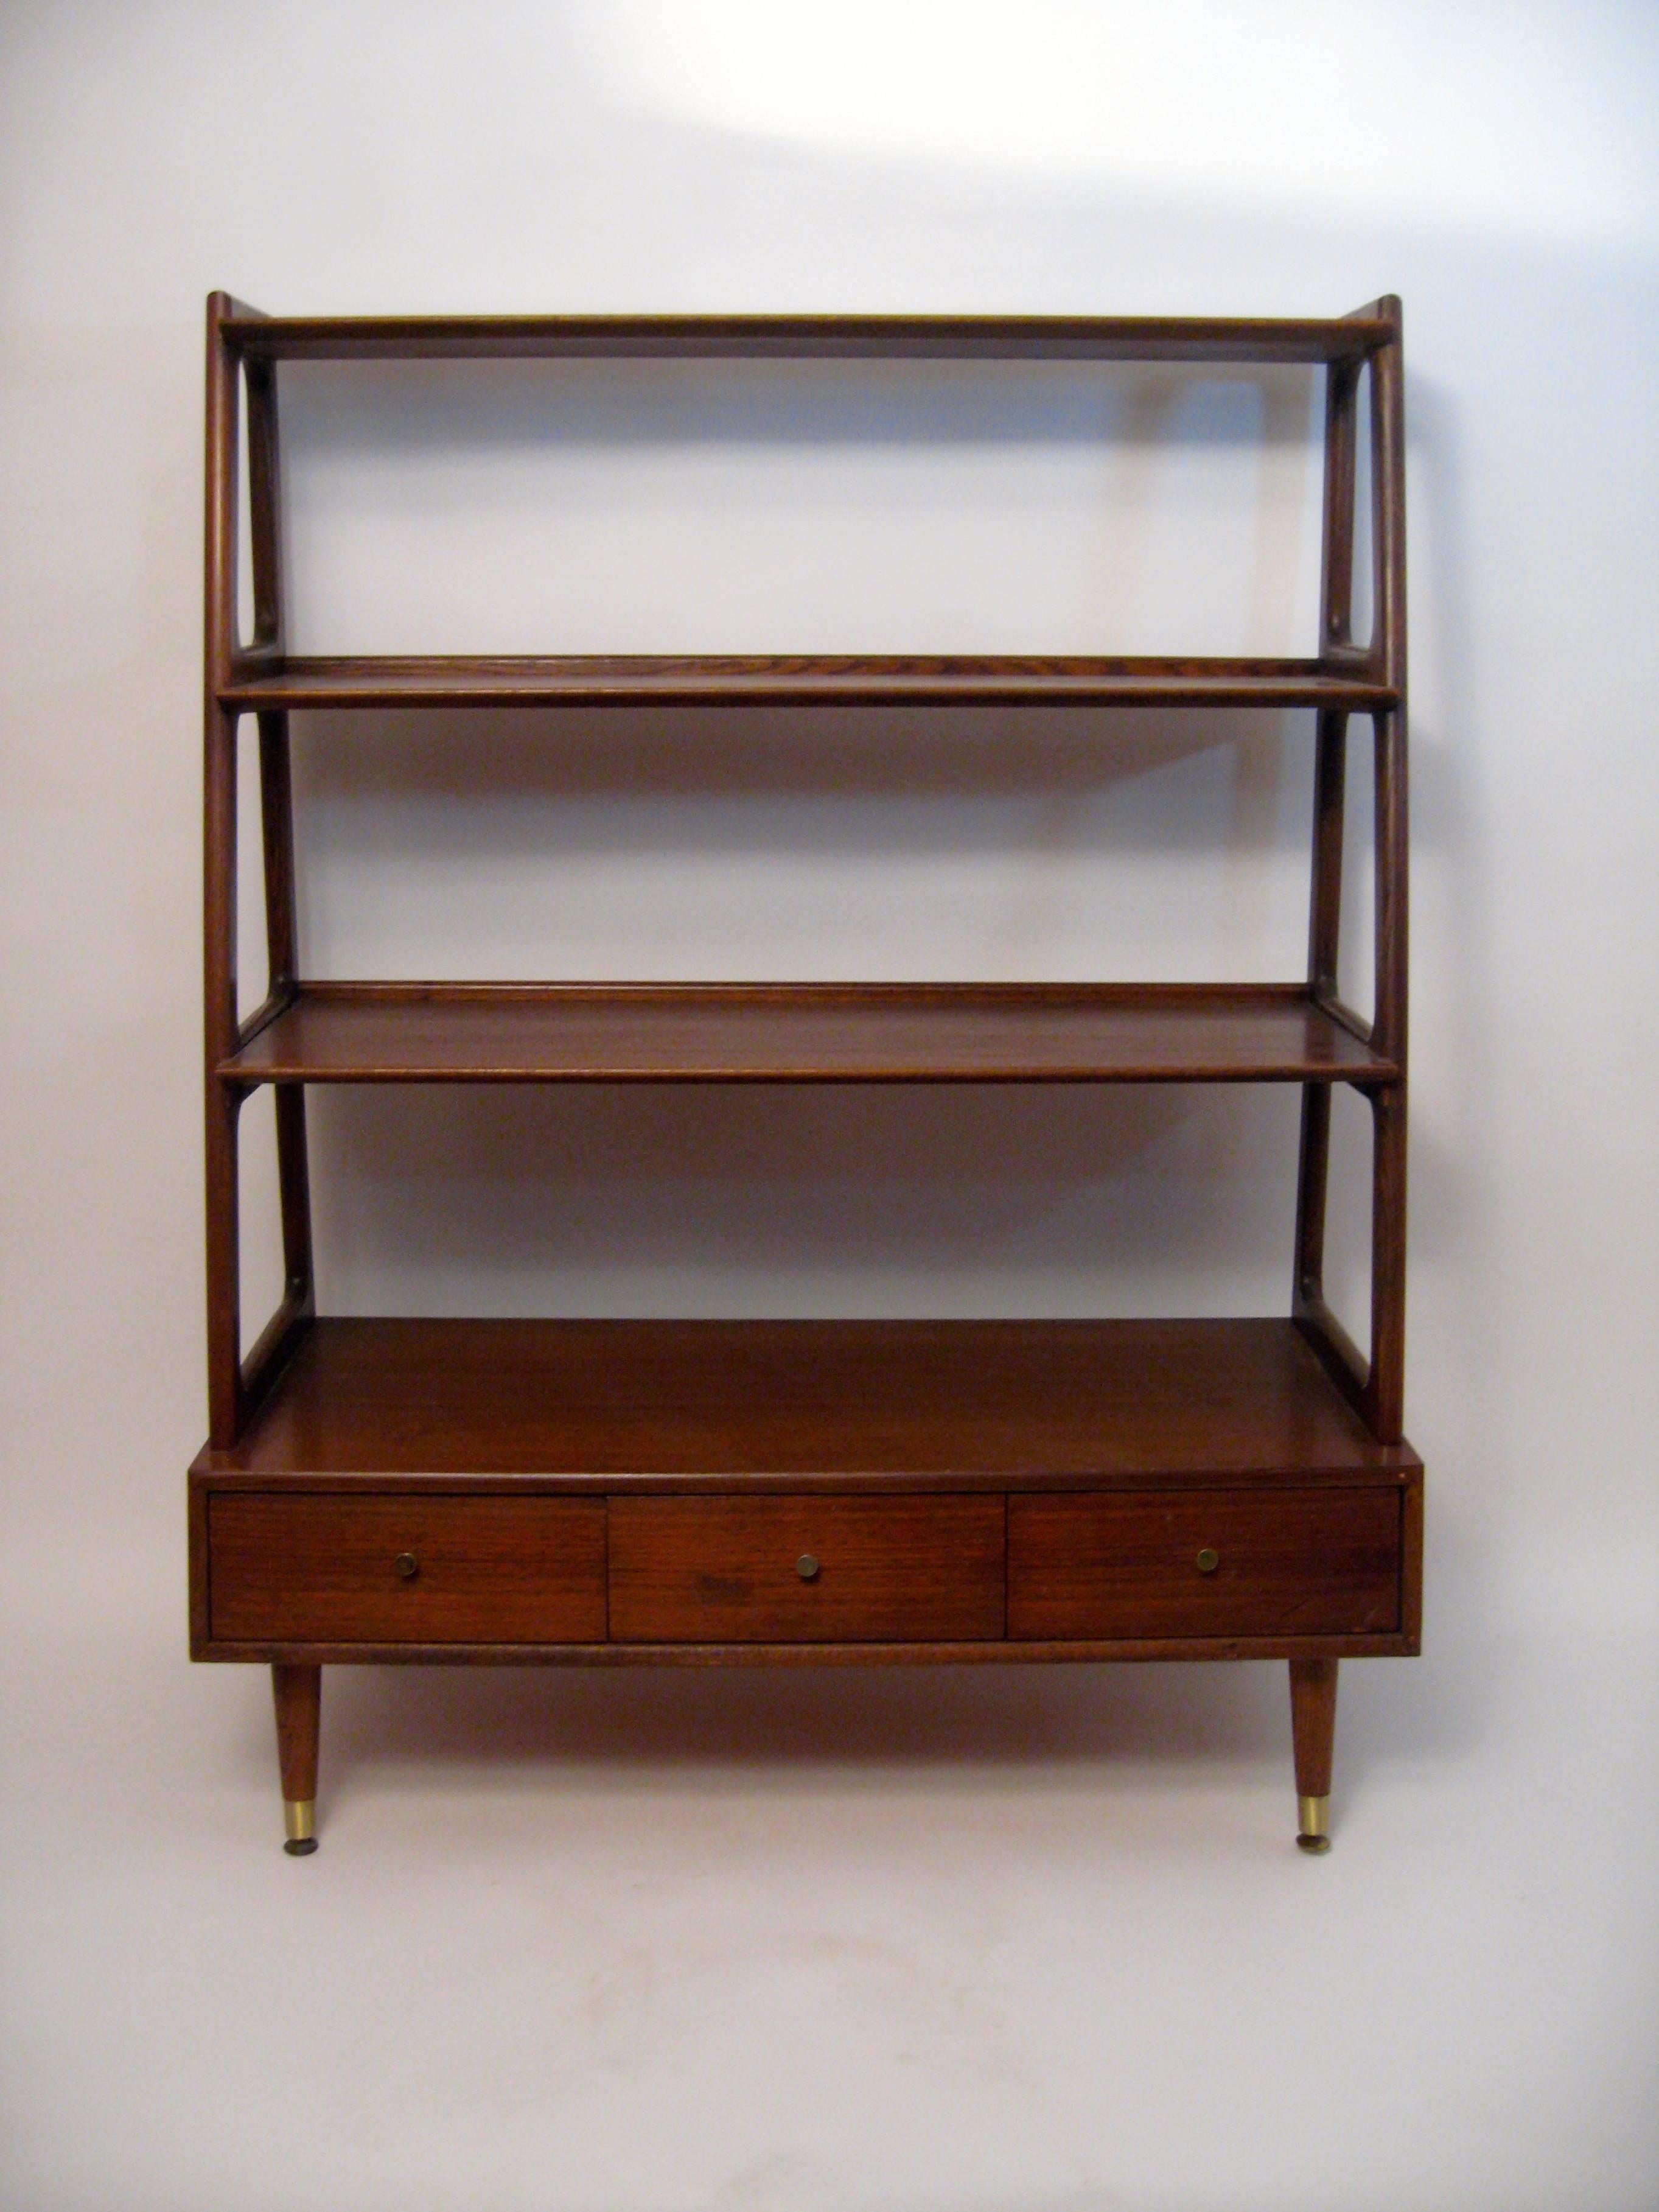 Tiered and graduated walnut shelves supported by solid oak upright supports and finished with three drawers. Solid, free standing bookcase or etagere that has a finished back and can be used in an 'open floor plan' as a partition or room divider.